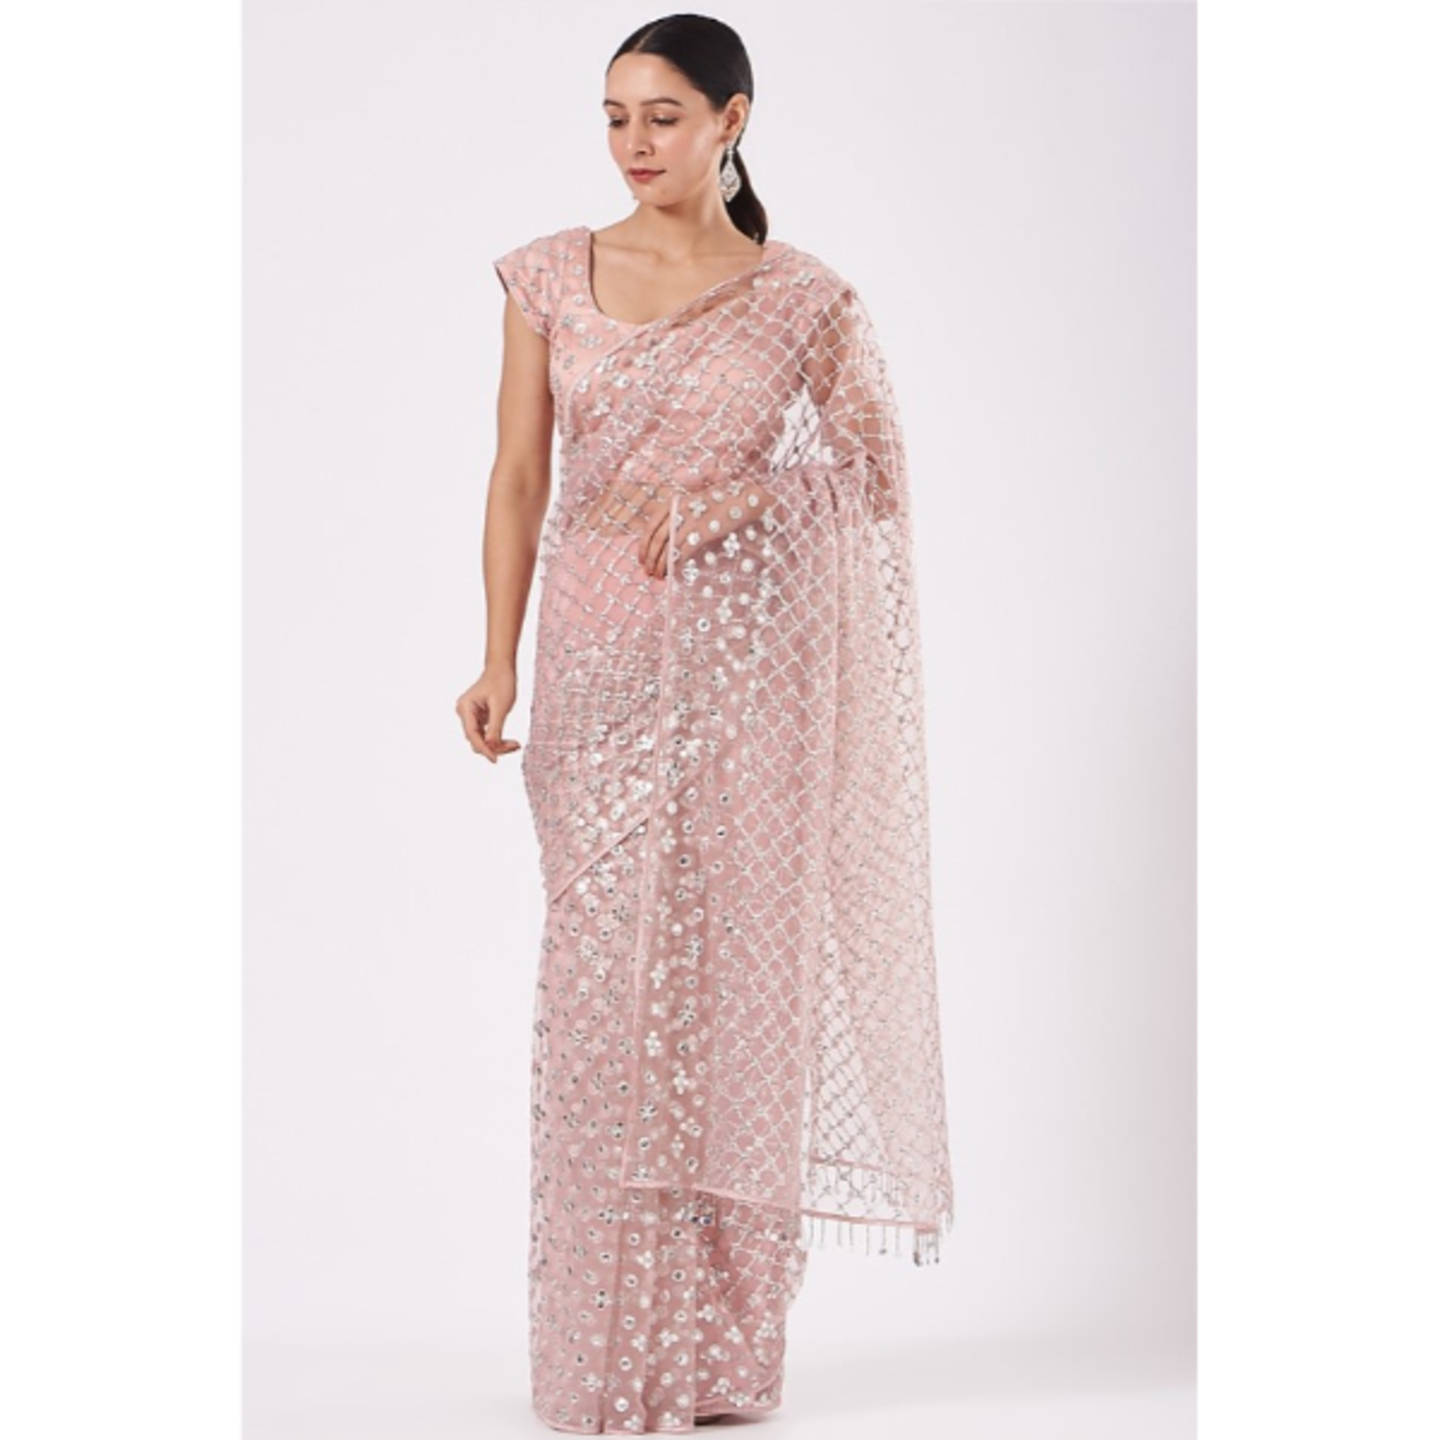 PERIWINKLE  A GLAMOROUS blush pink tulle saree in silver embroidery.